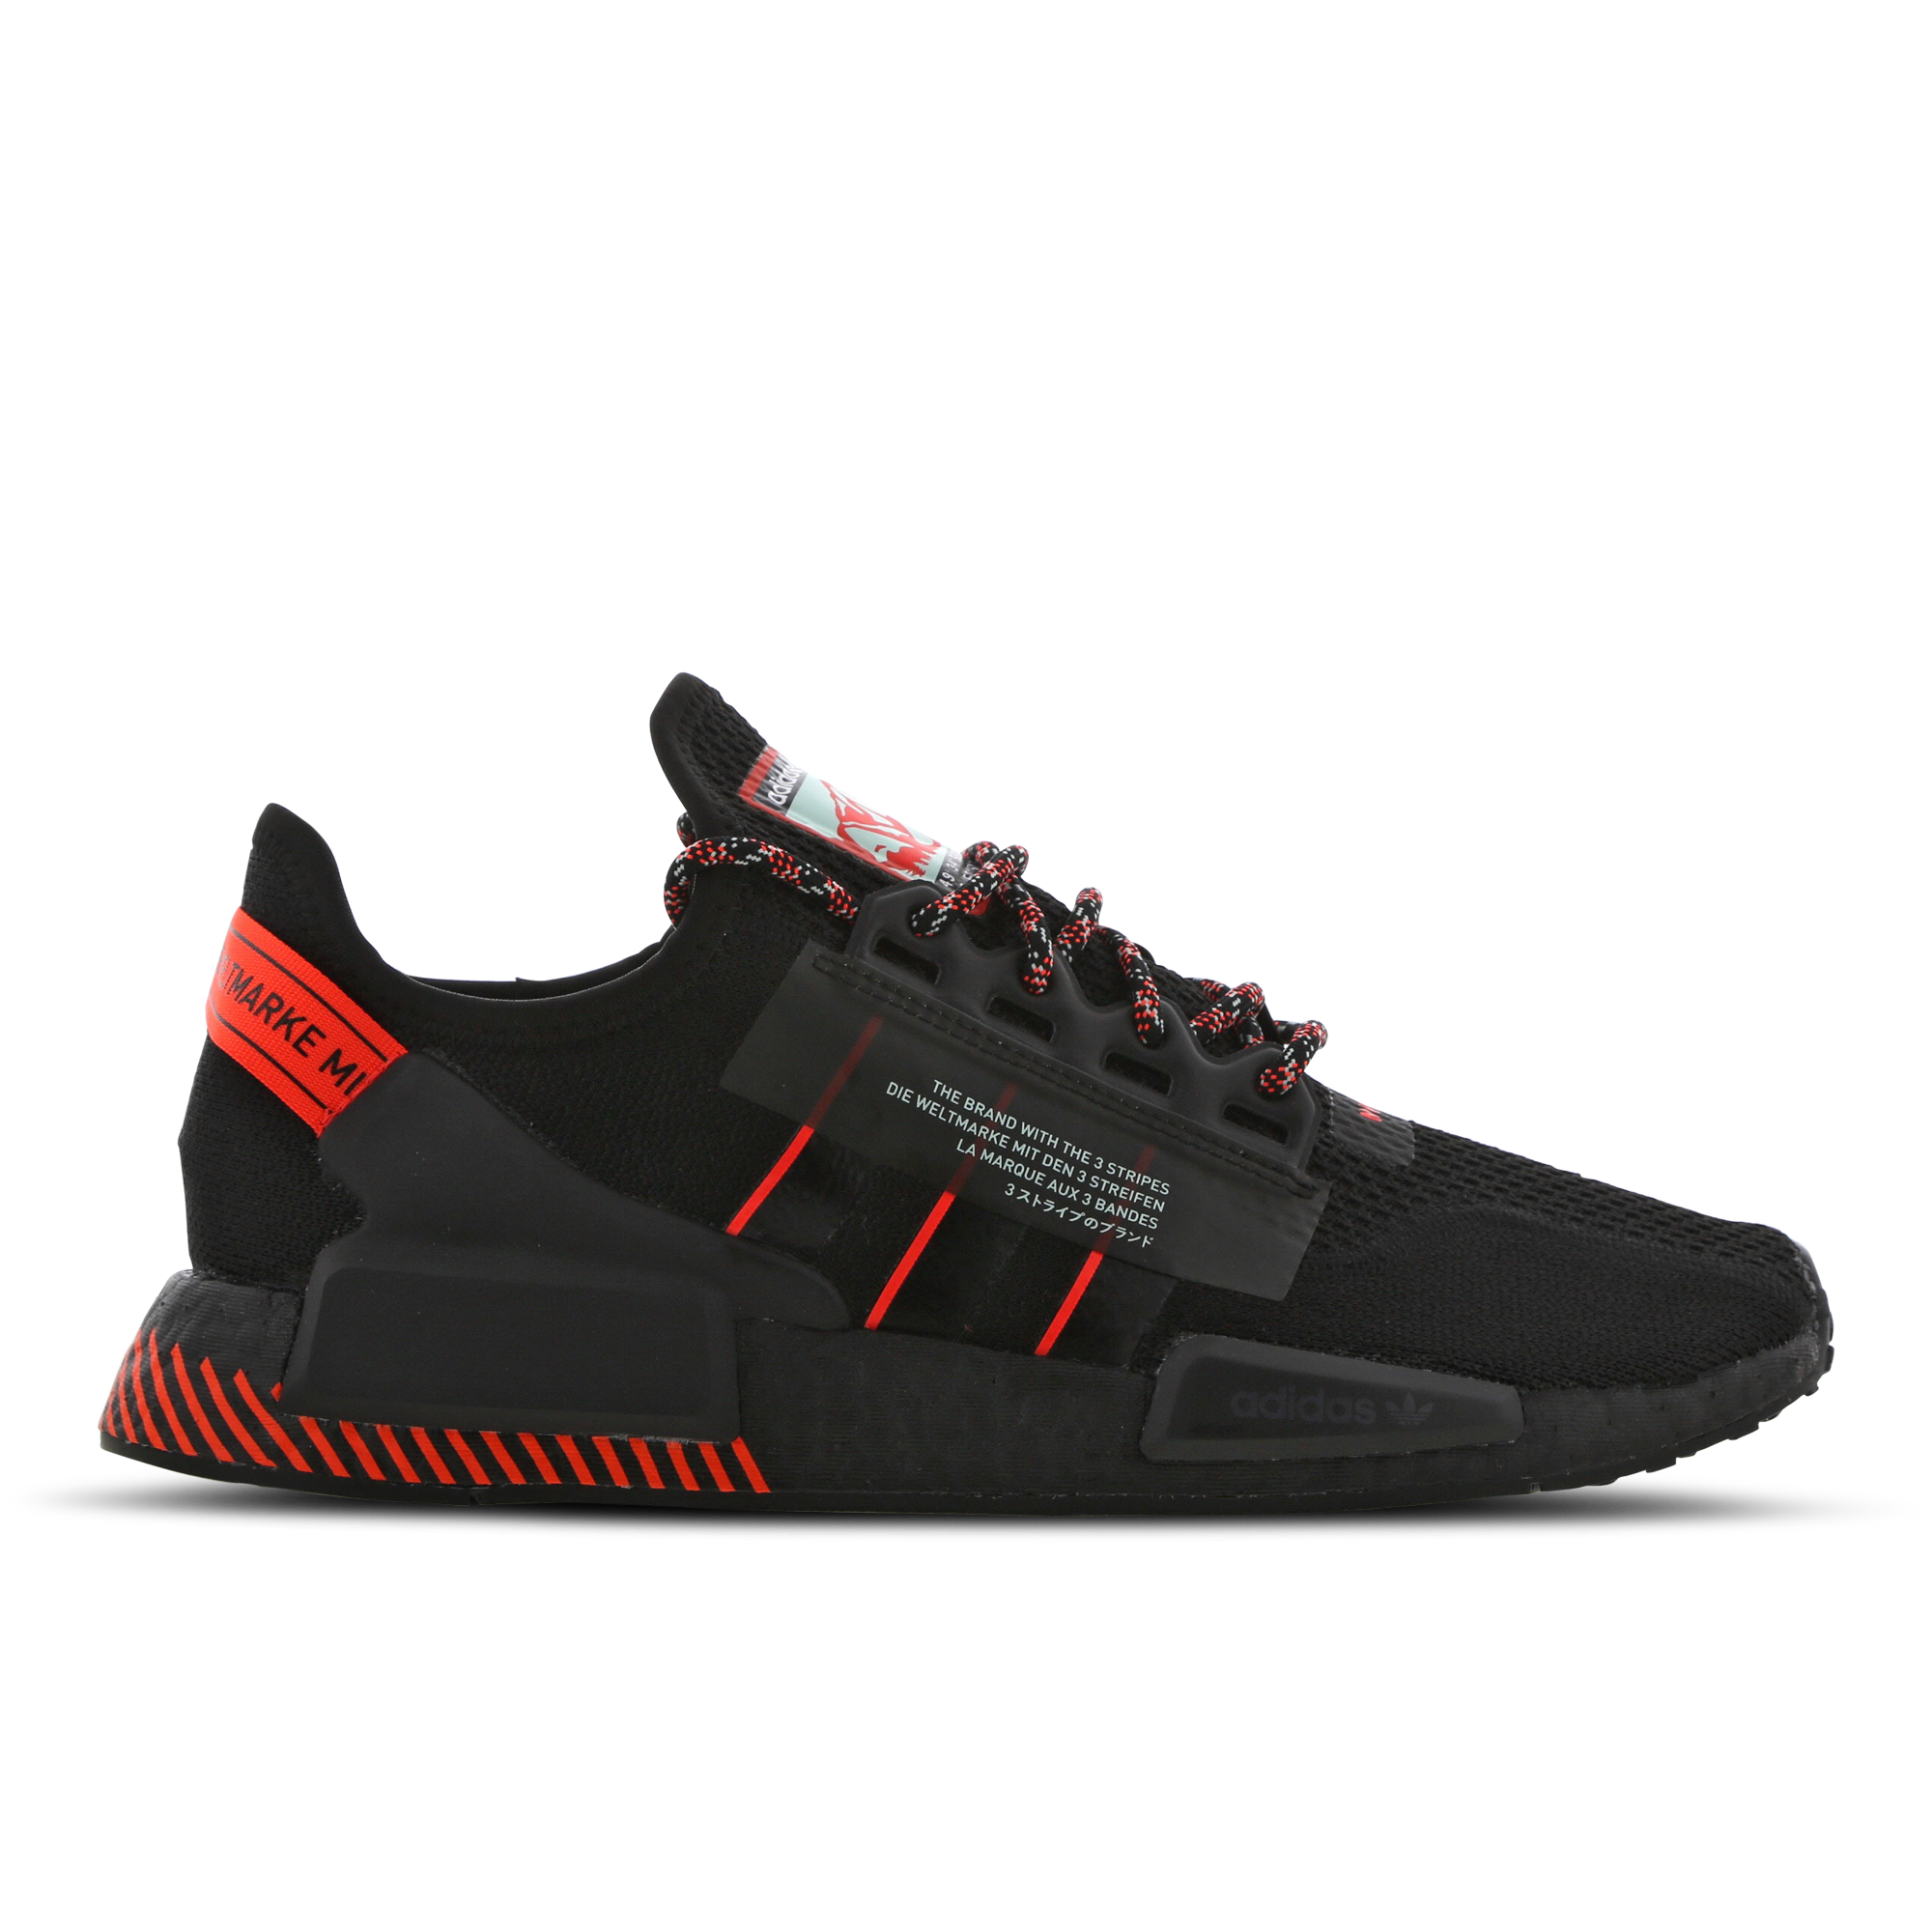 Adidas Nmd R1 Cloud White Solar Red for Men Lust